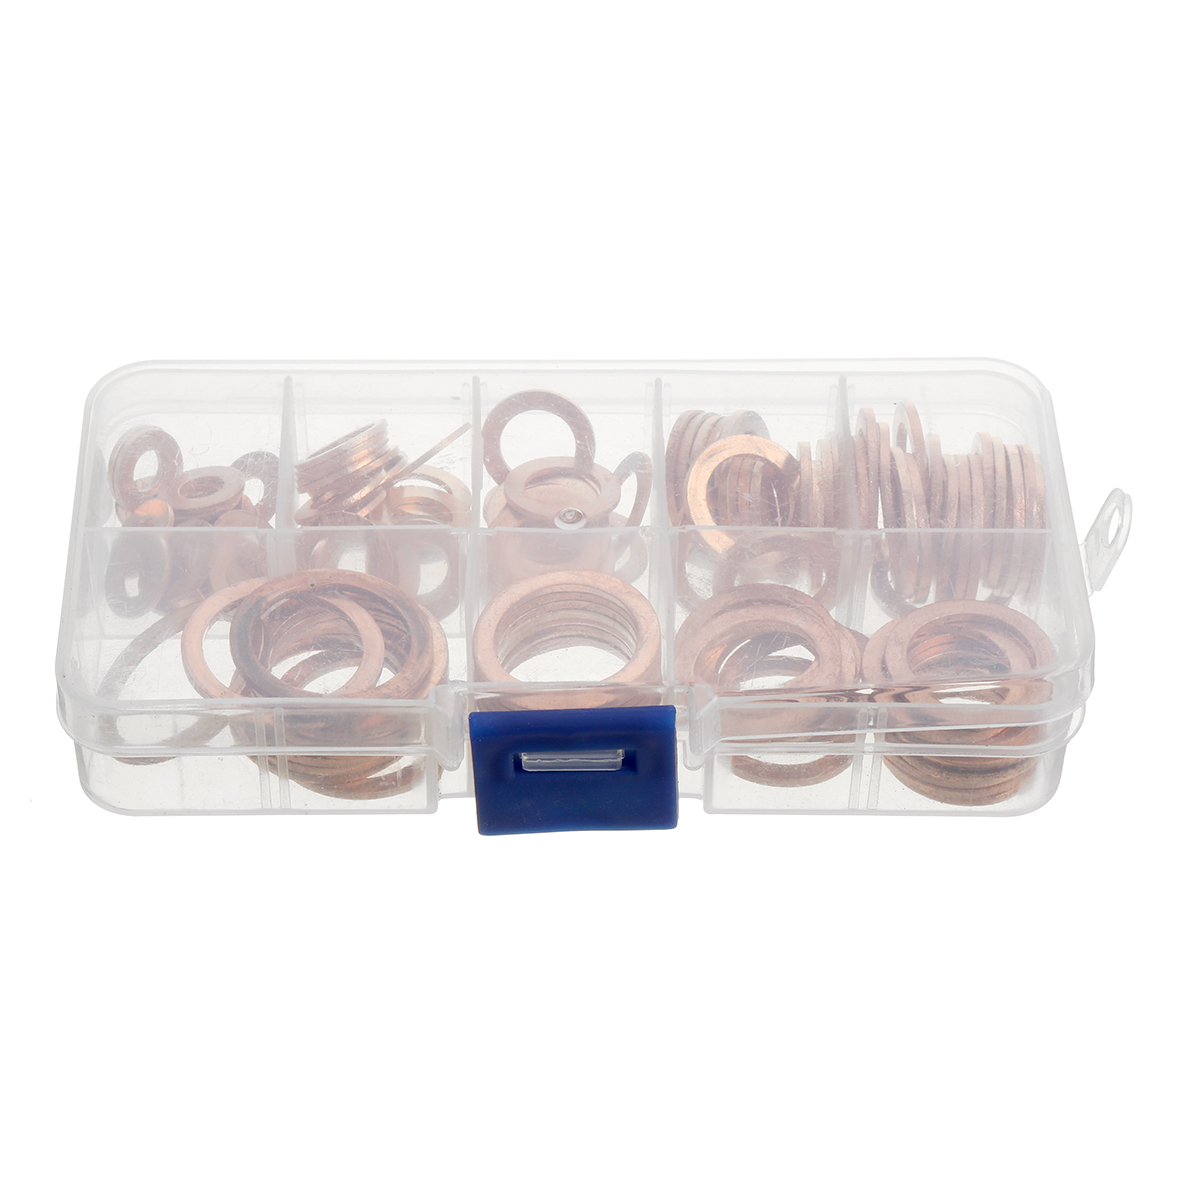 100Pcs-Assorted-Copper-Sealing-Solid-Gasket-Washer-Sump-Plug-Oil-For-Boat-Crush-Flat-Seal-Ring-Tool--1809755-5